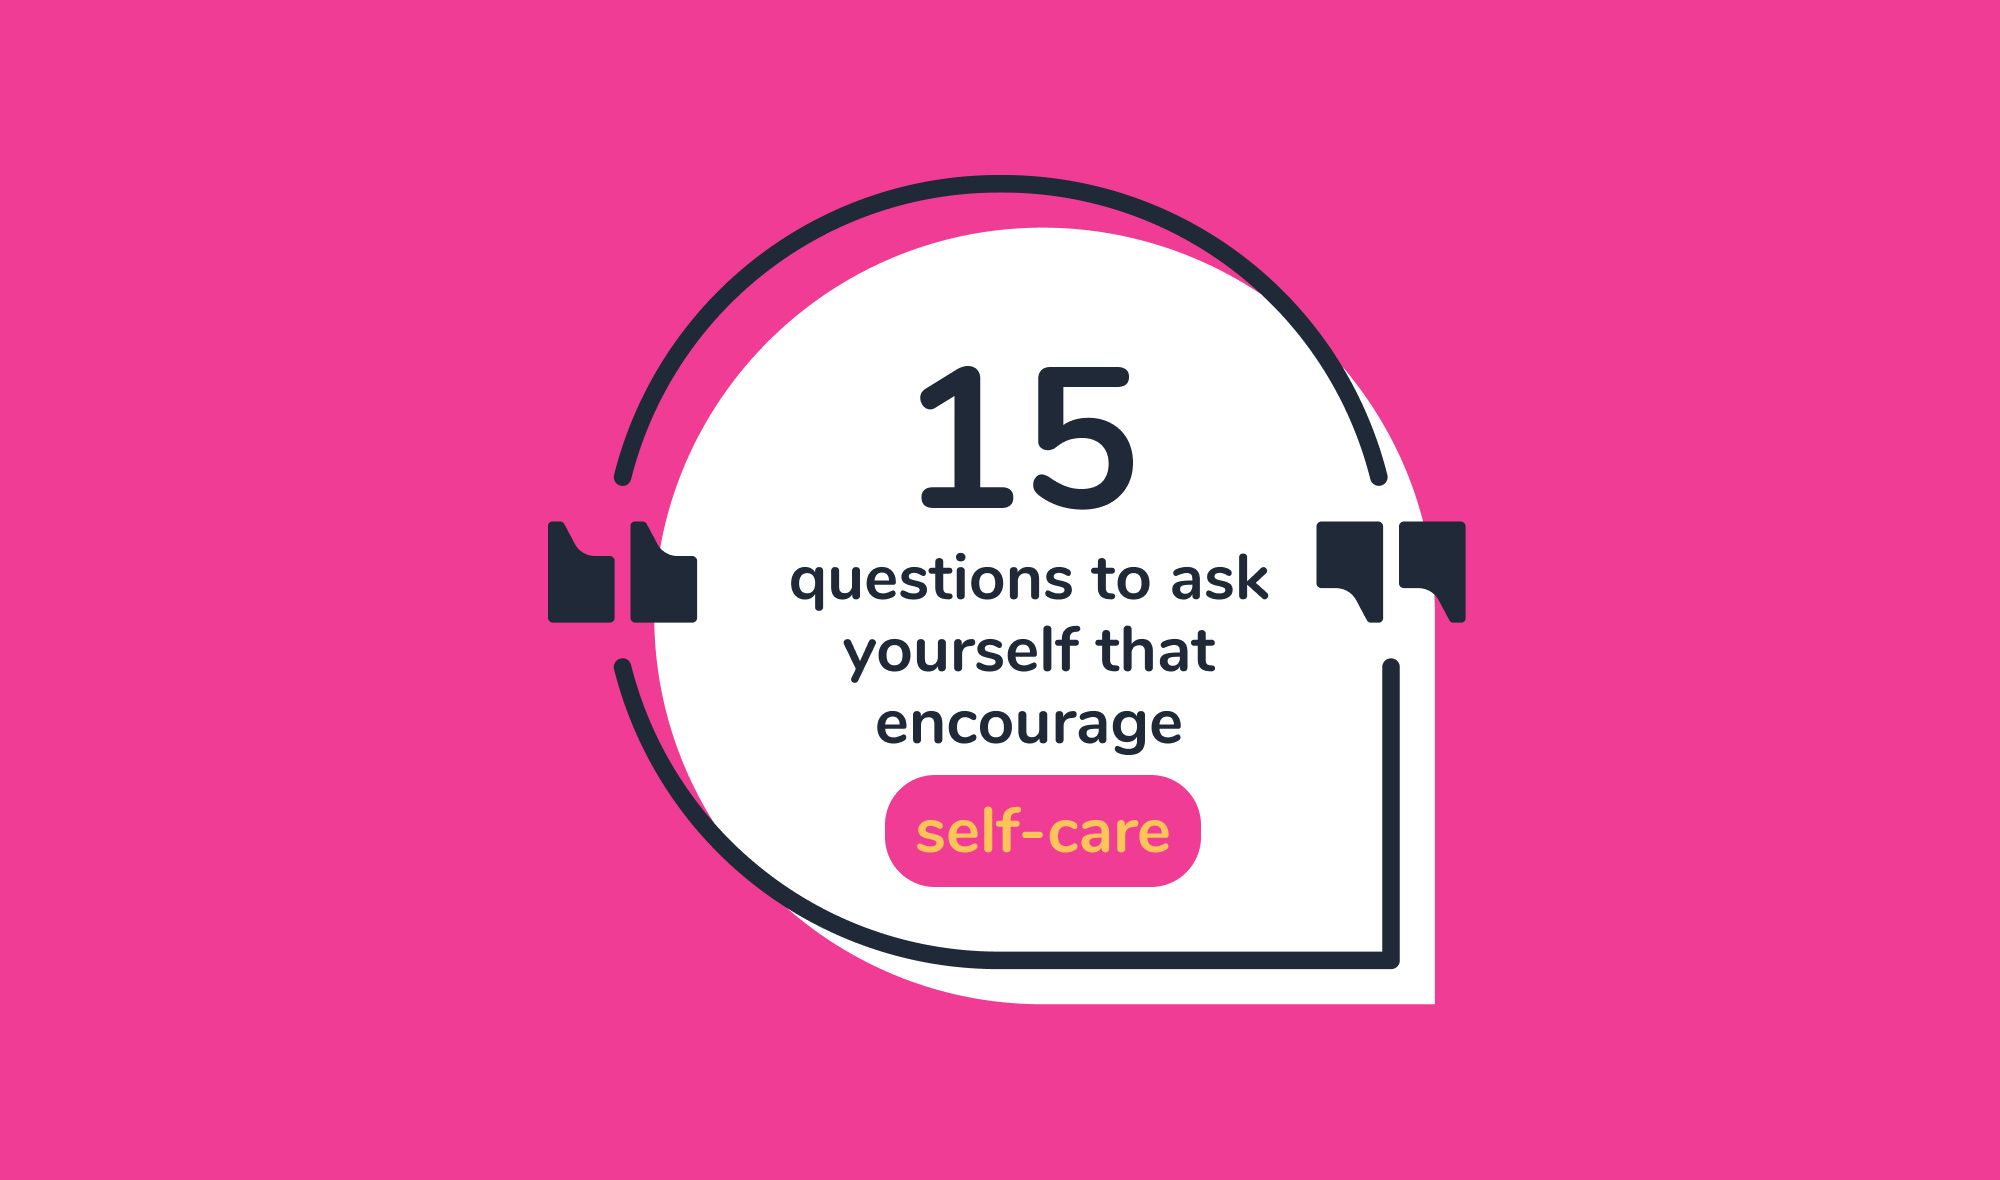 Self-reflection questions - 15 questions to ask yourself that encourage self-care